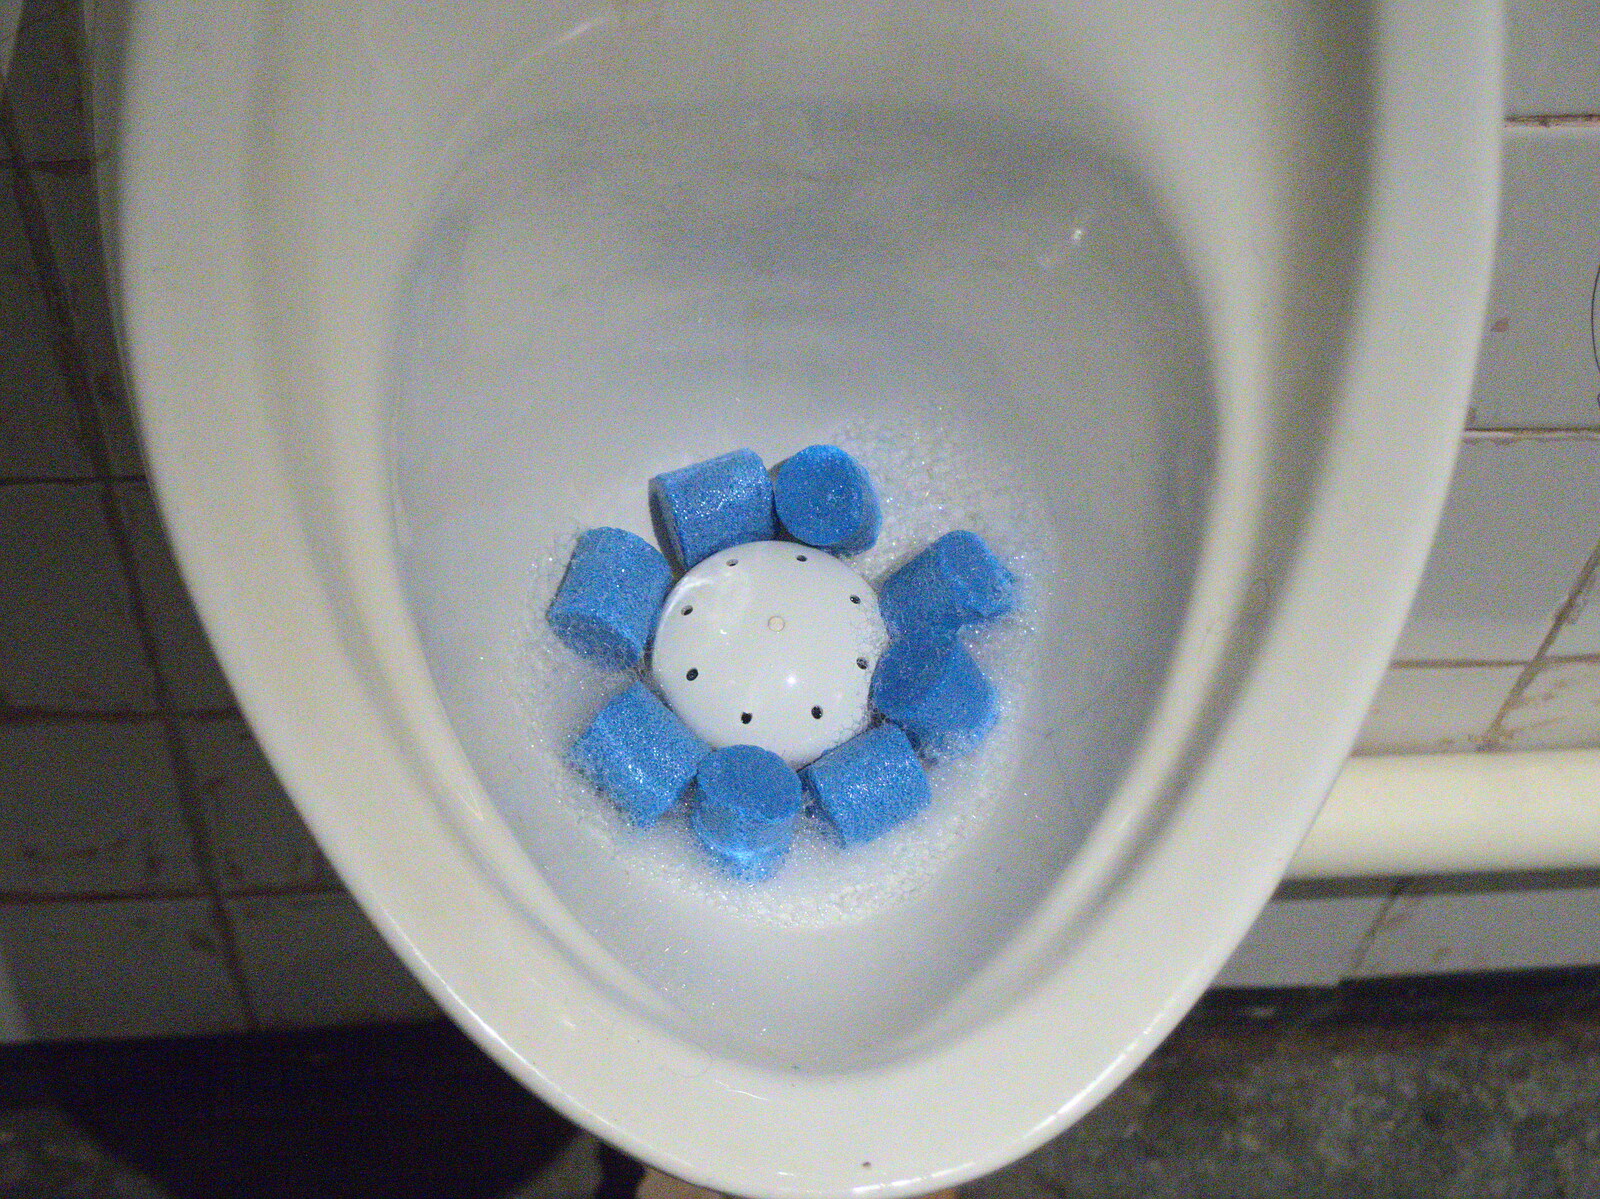 Urinal cakes look like a flower from A BSCC Ride to Pulham Market, Norfolk - 17th June 2021